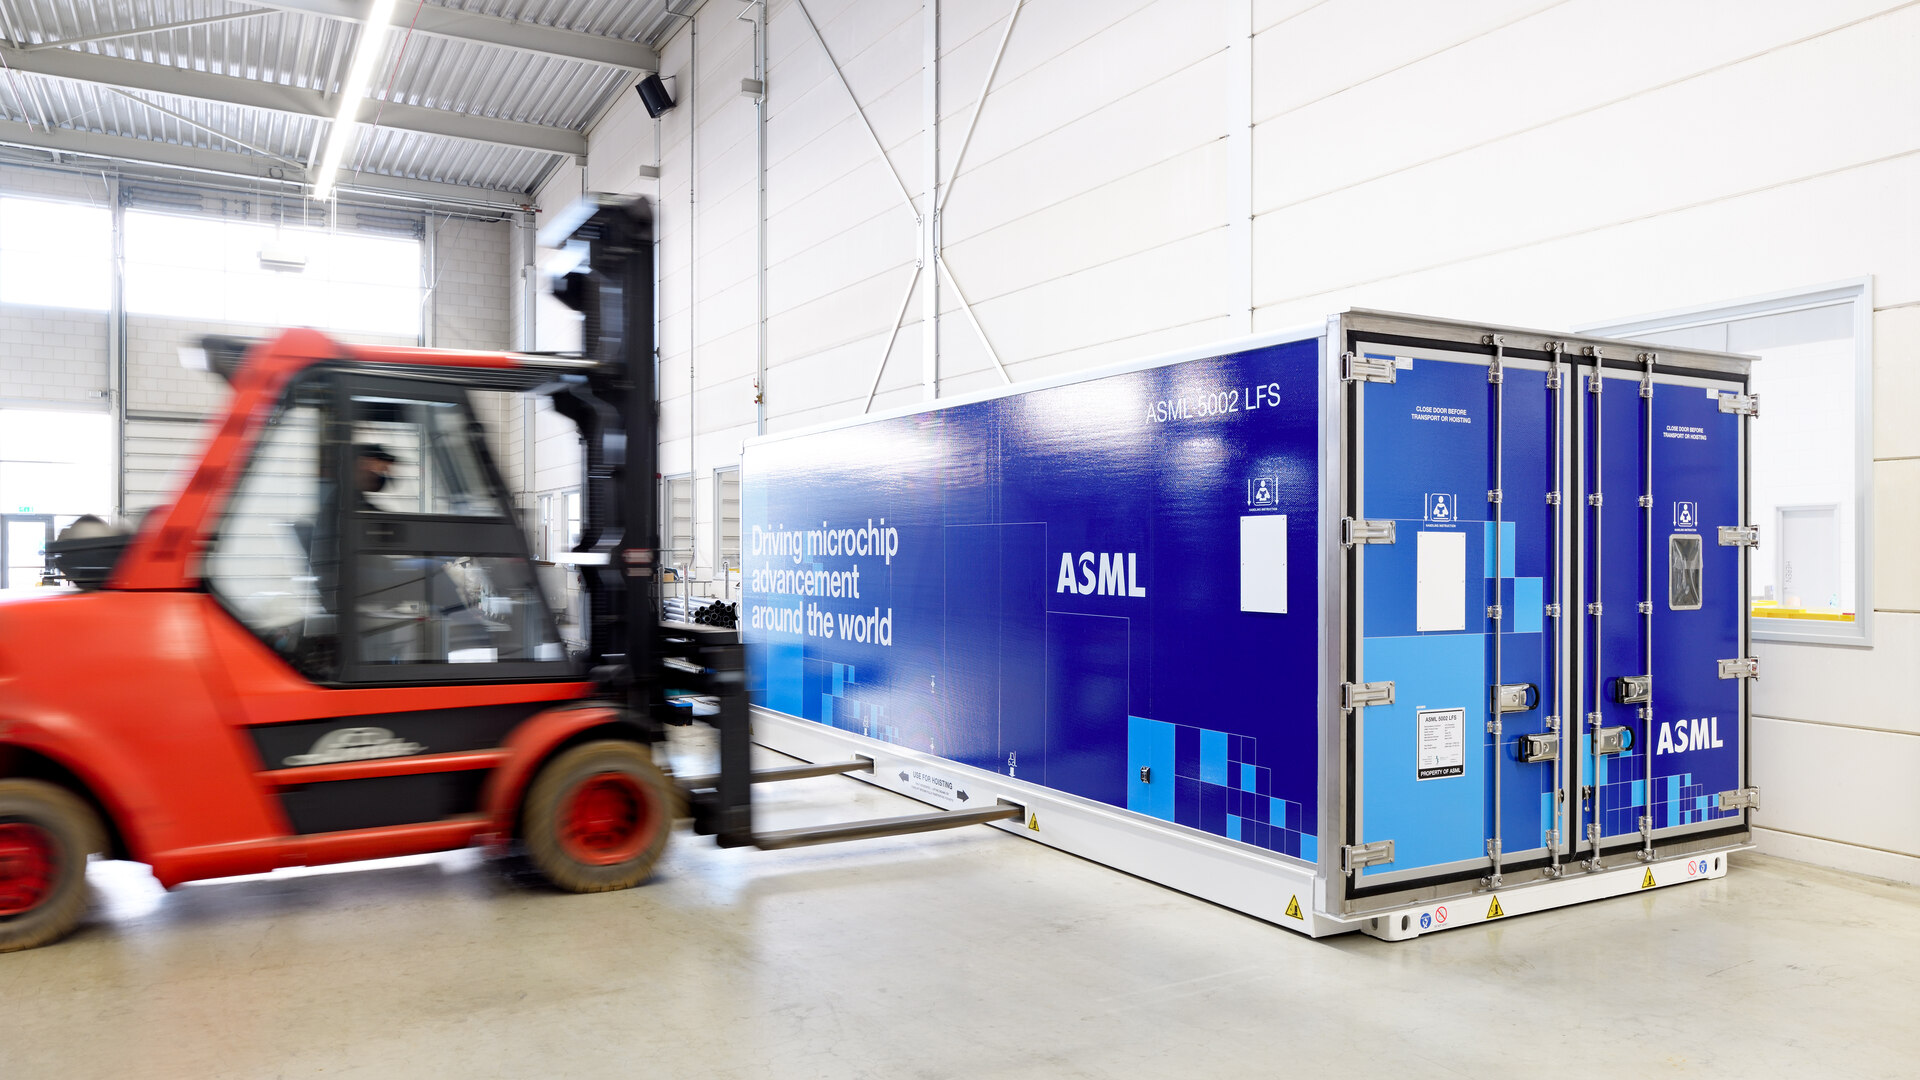 A forklift inside a warehouse approaches a large blue container bearing the words “ASML” and “Driving microchip advancement around the world”.